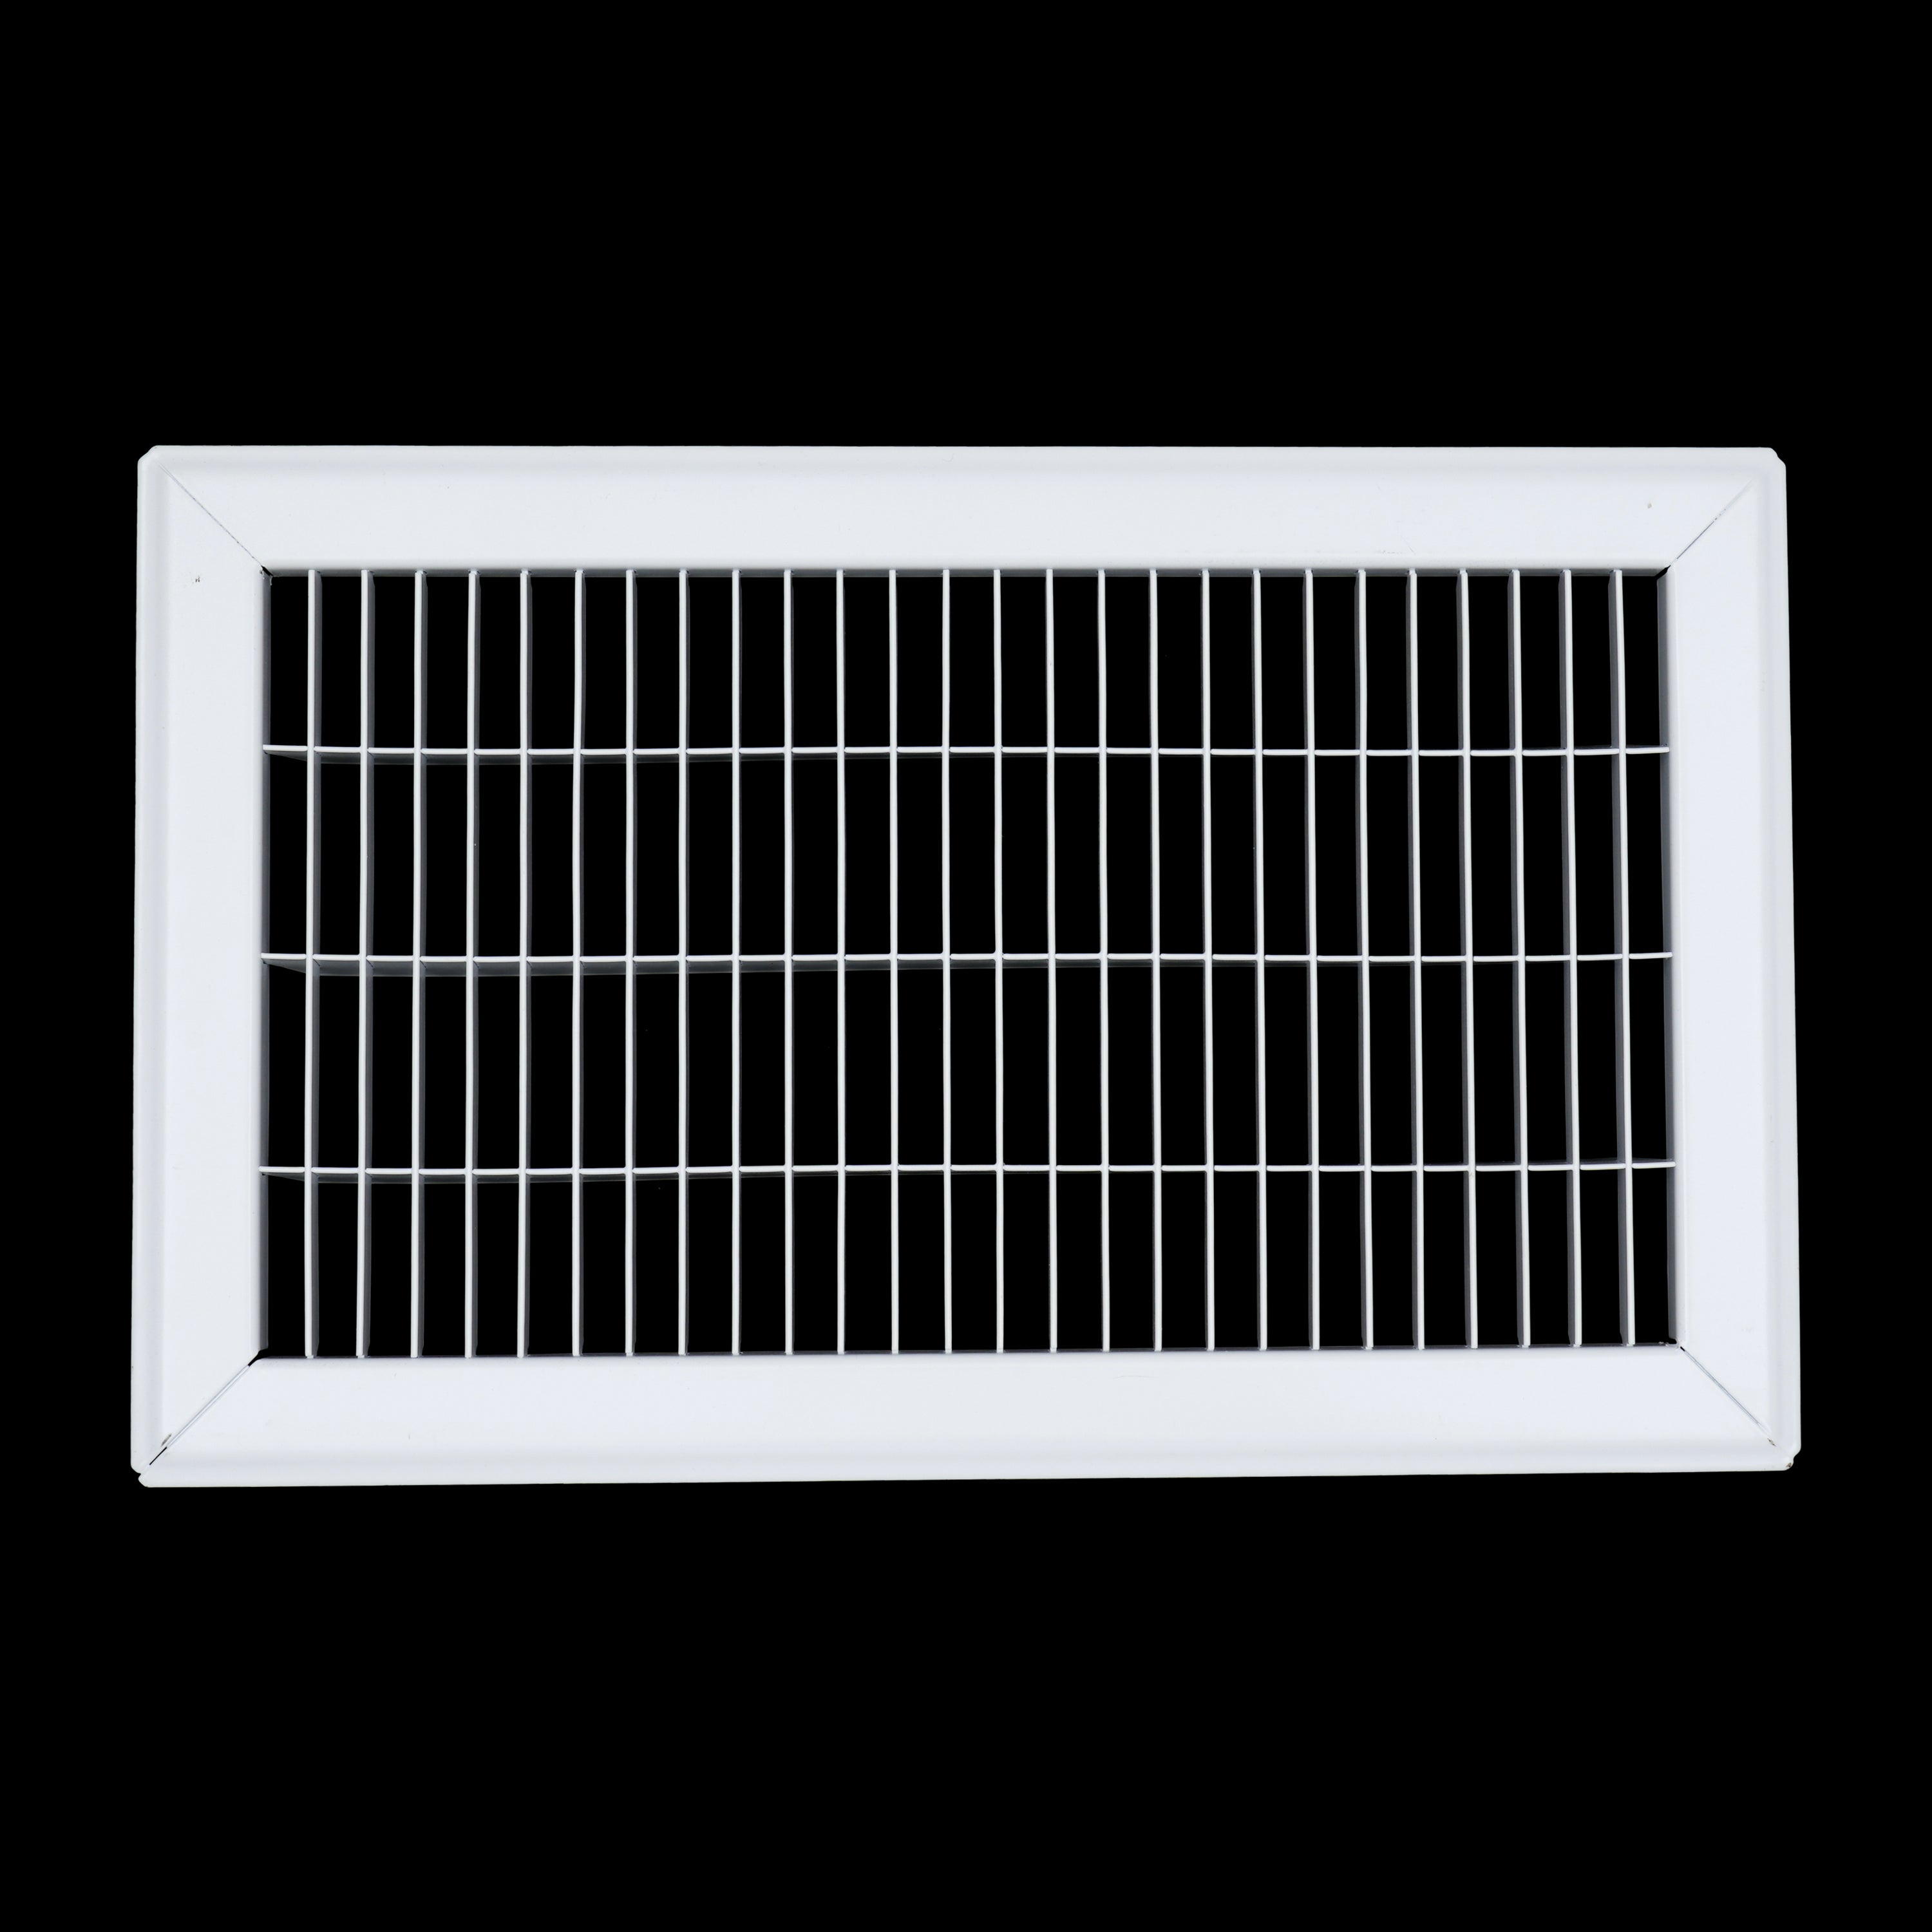 8"W x 14"H [Duct Opening] Return Air Floor Grille | Vent Cover Grill for Floor - White| Outer Dimensions: 9.75"W X 15.75"H